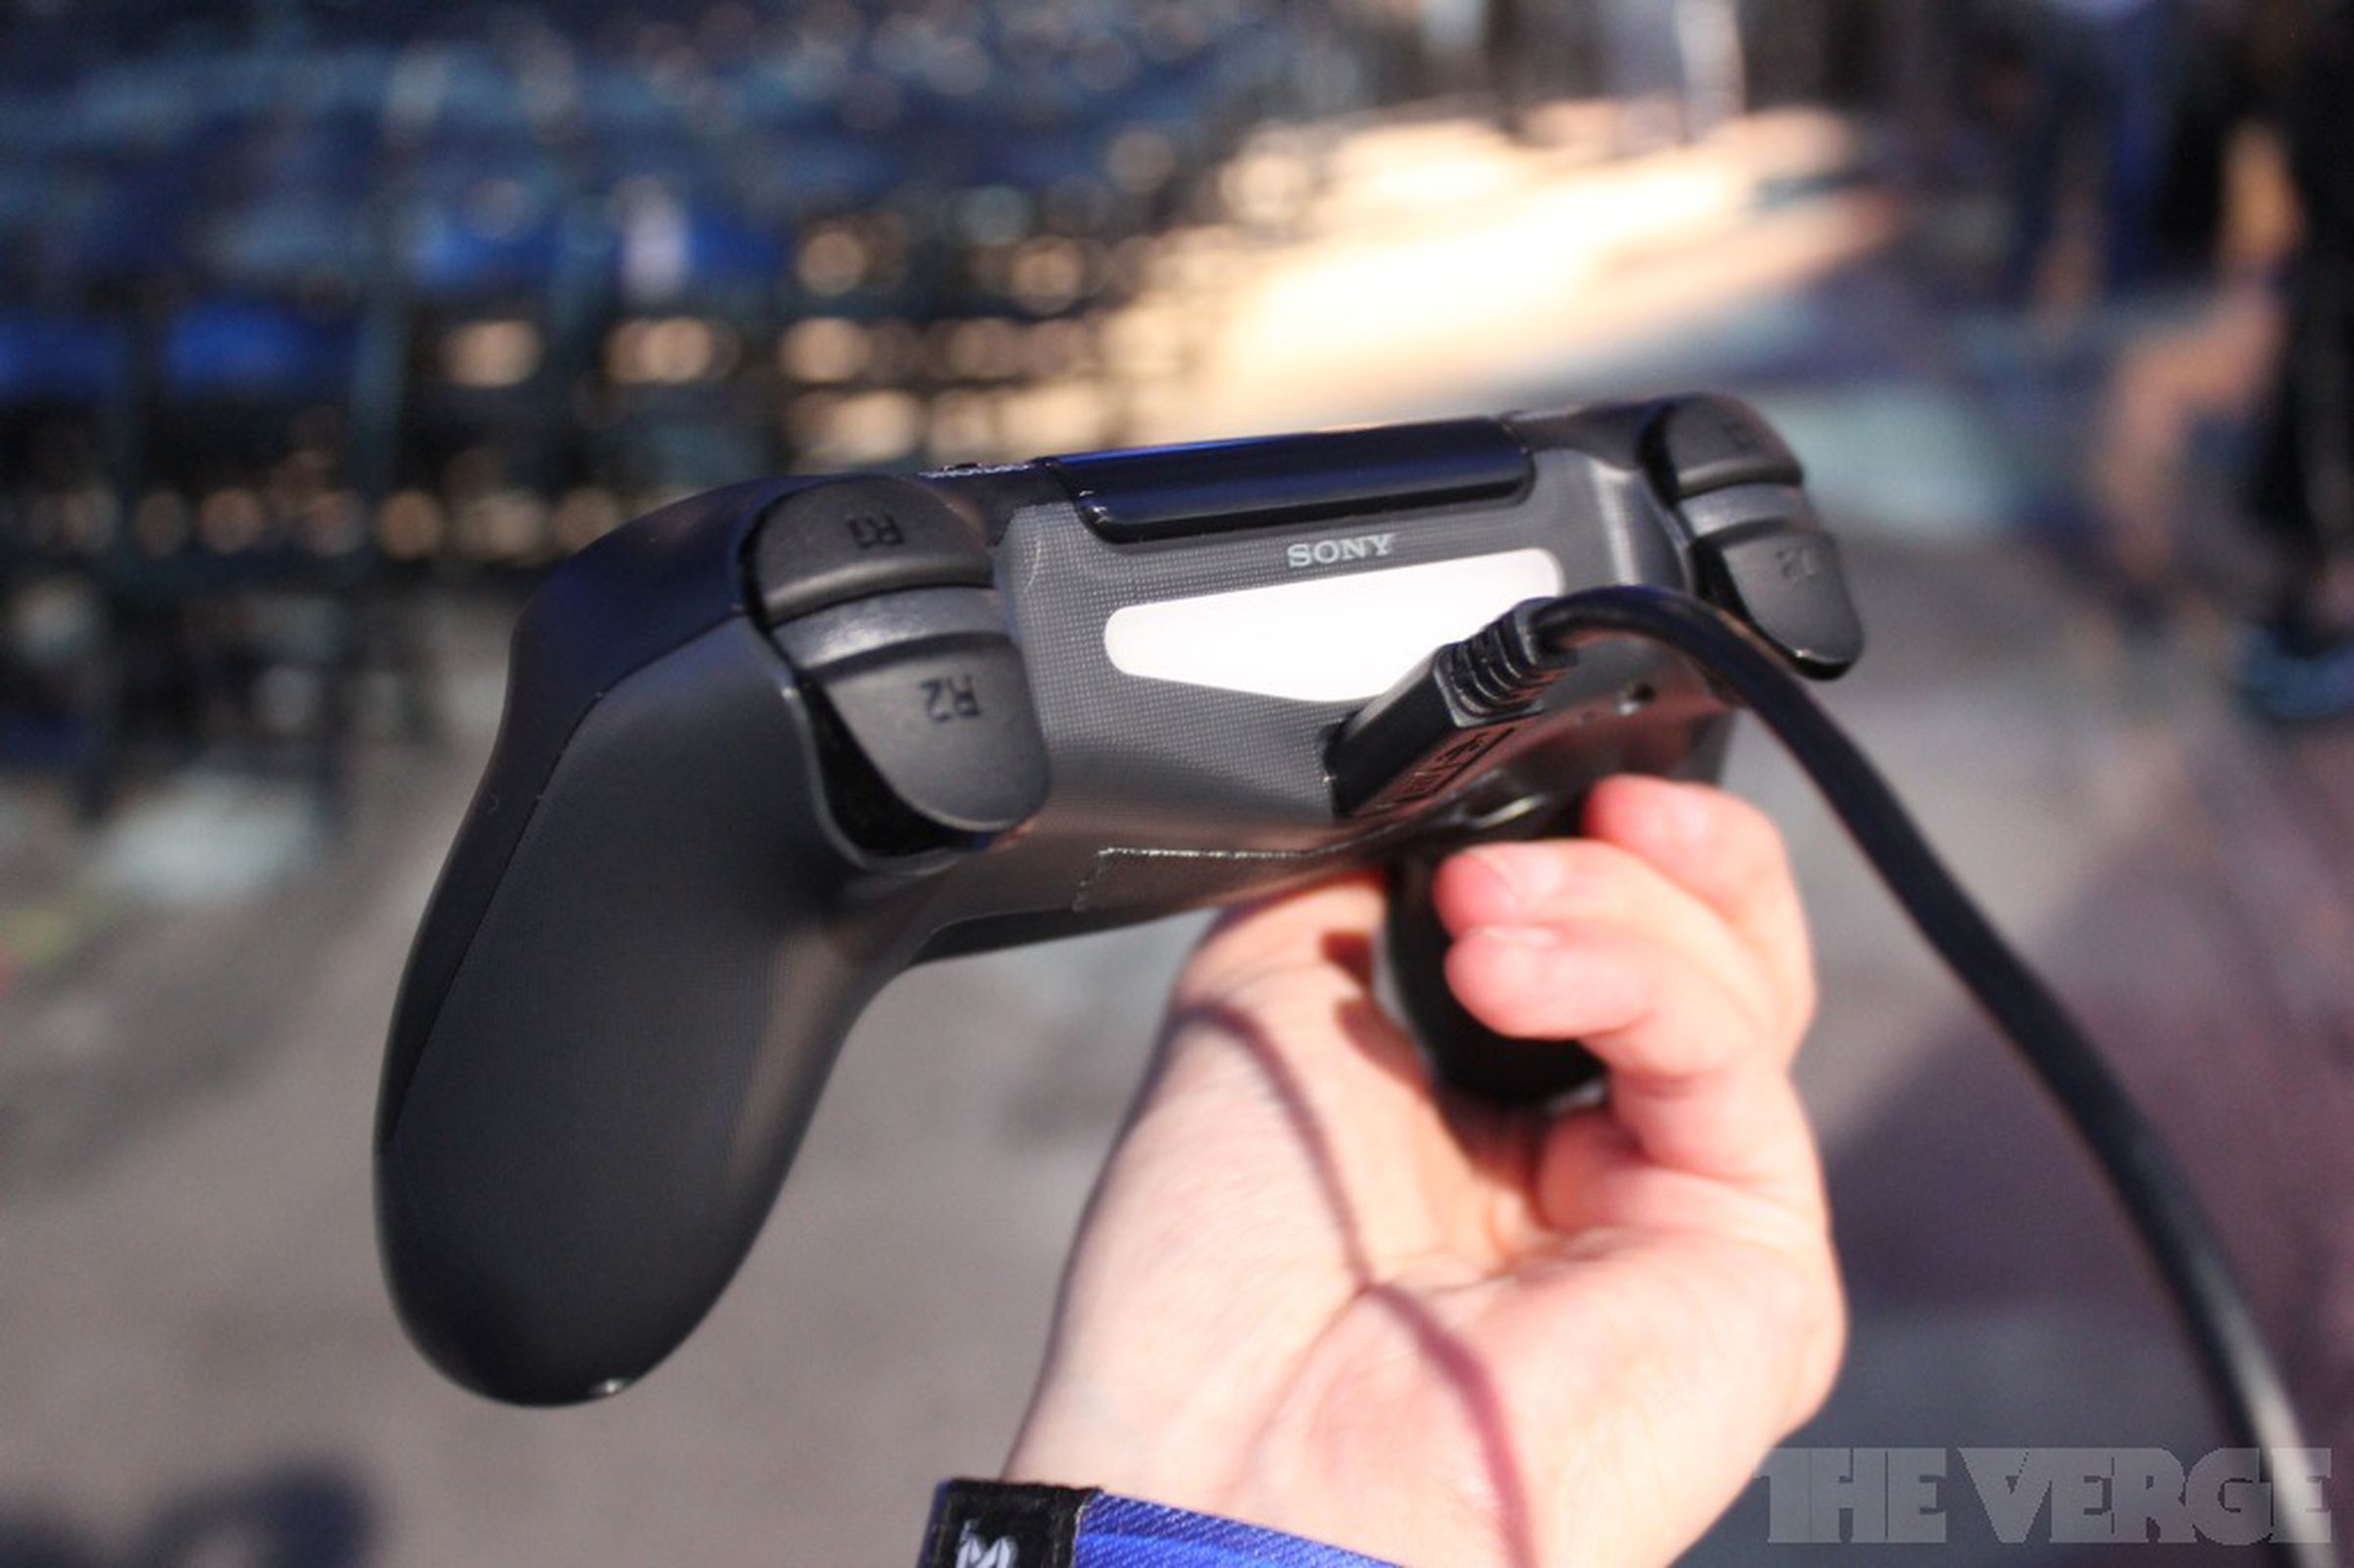 Sony PlayStation 4 controller hands-on images